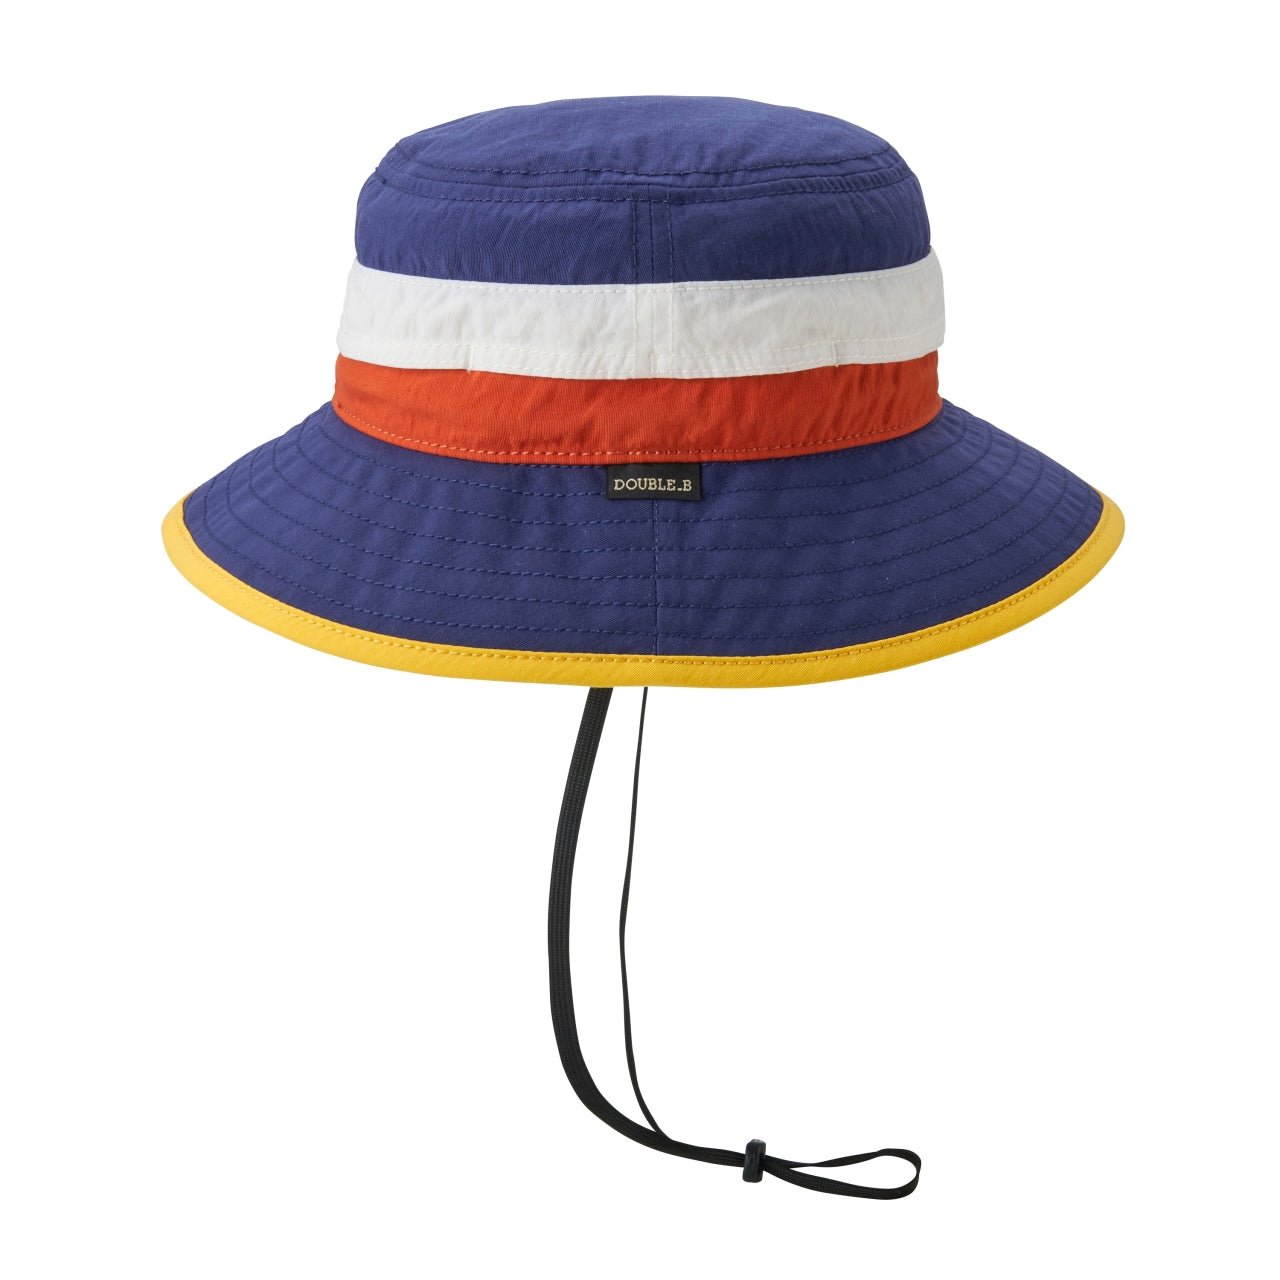 DOUBLE_B Multicolor Bucket Hat (UV Protection) - MIKI HOUSE USA